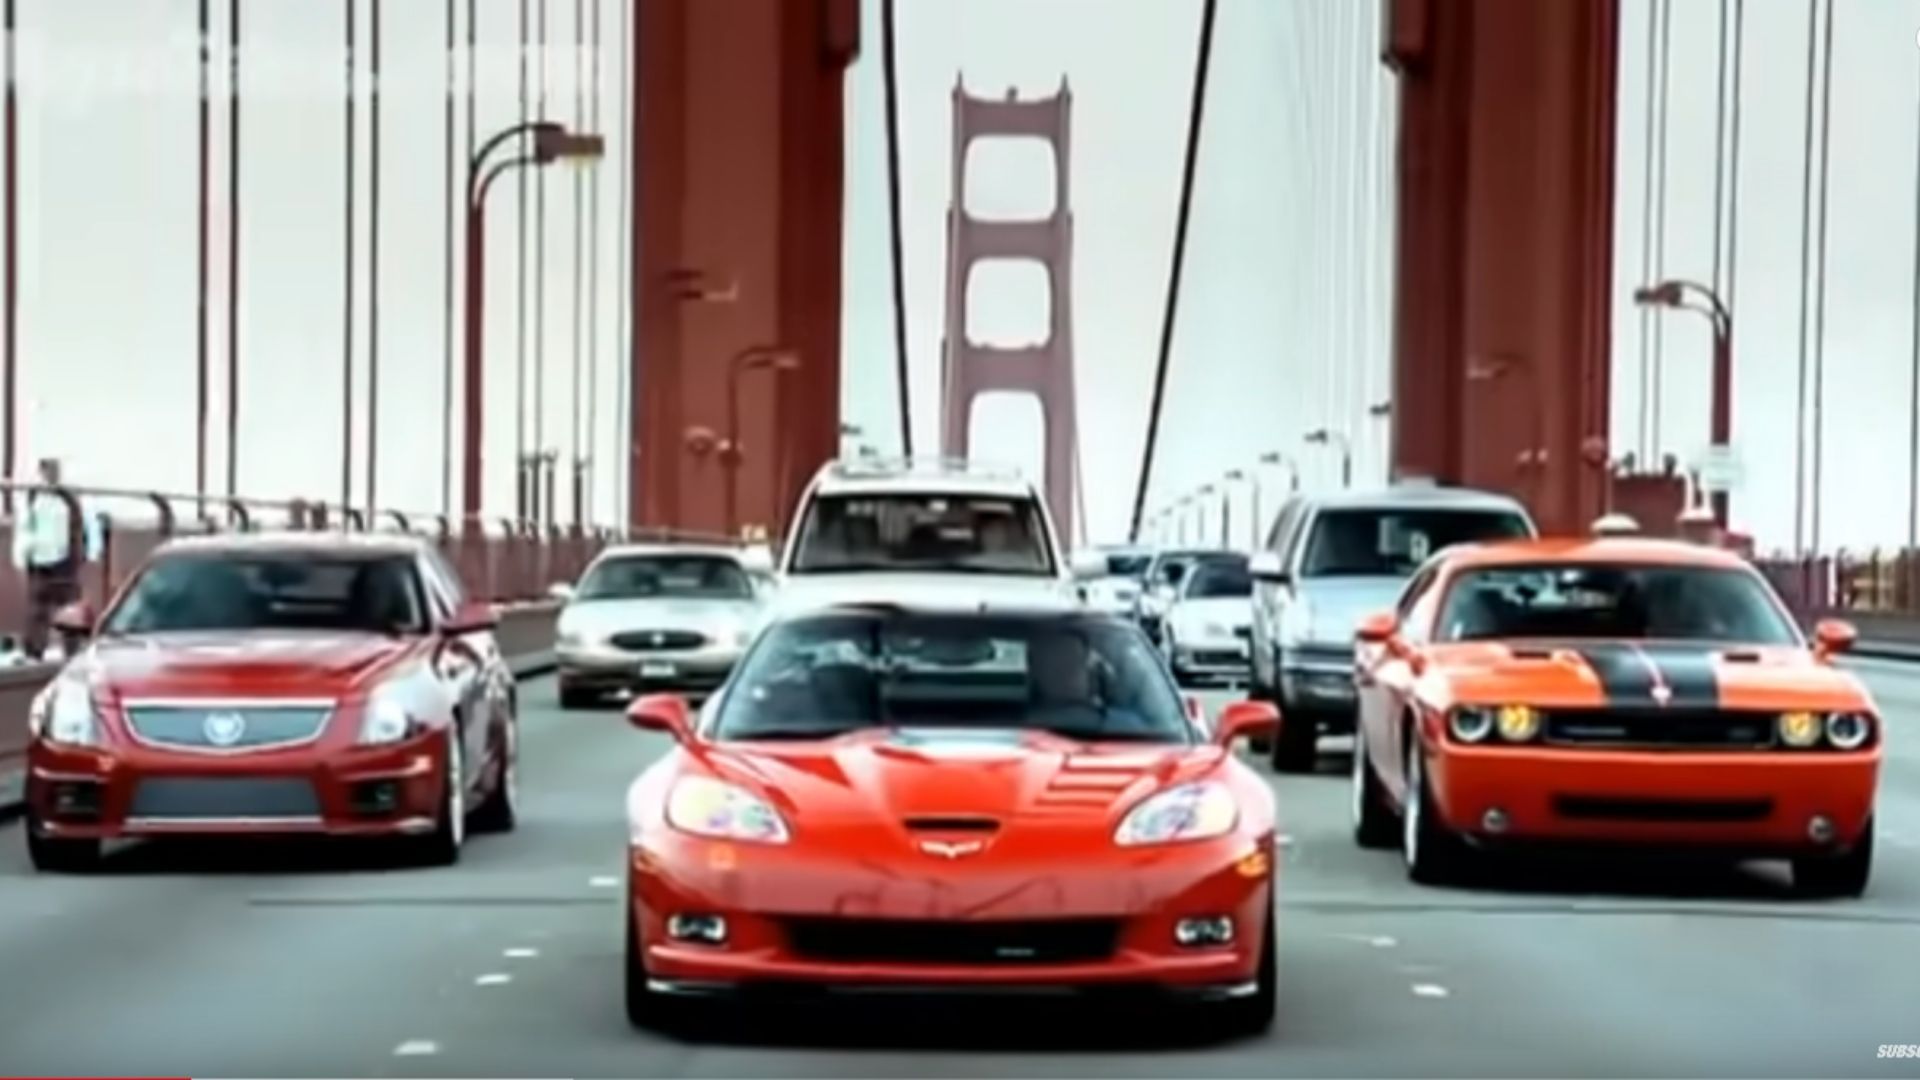 Top Gear's American Muscle Cars Episode Was Revealing